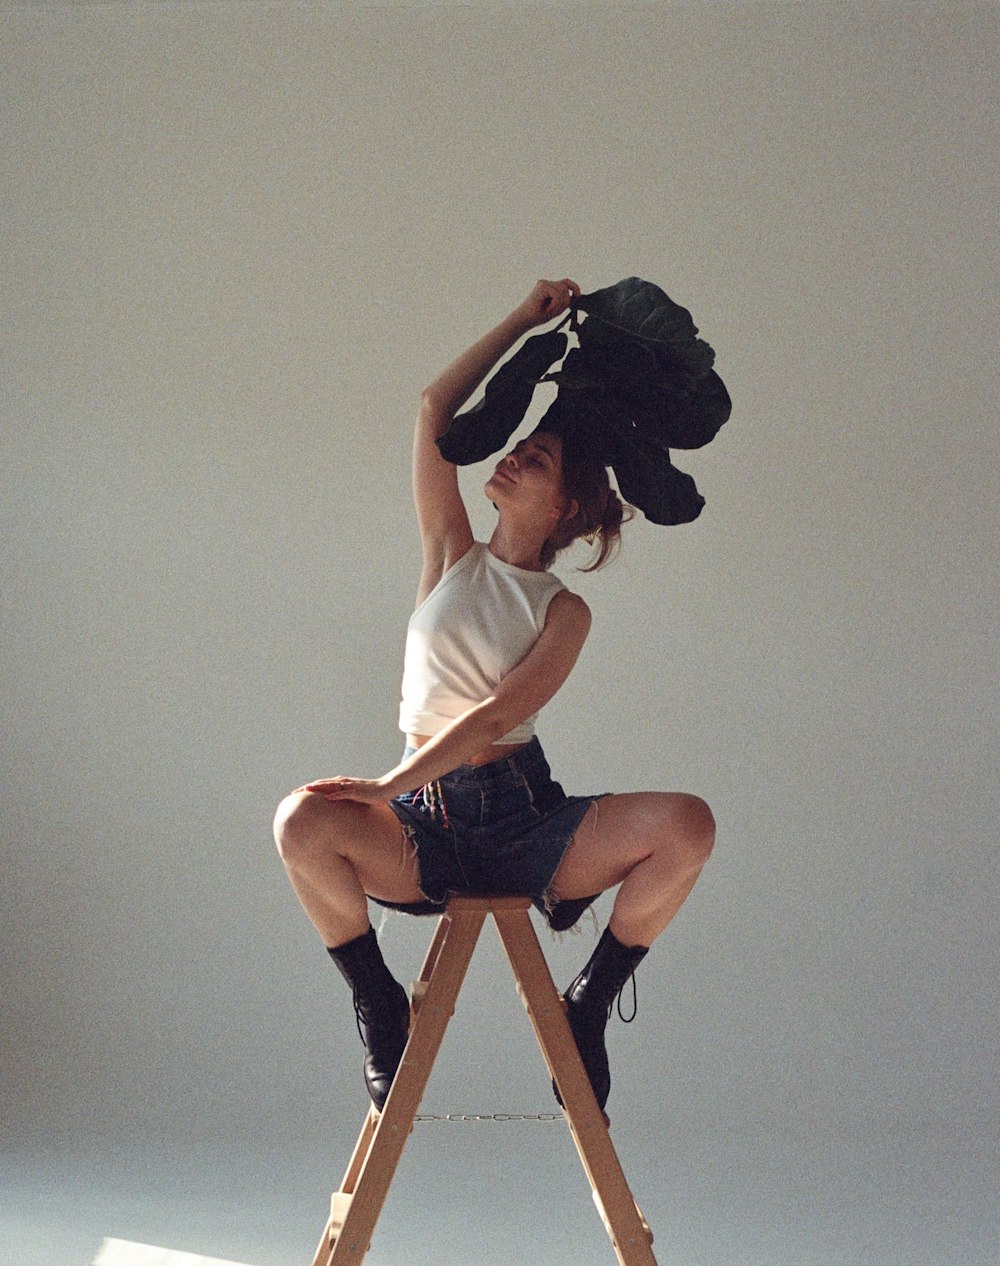 a woman sitting on top of a wooden ladder